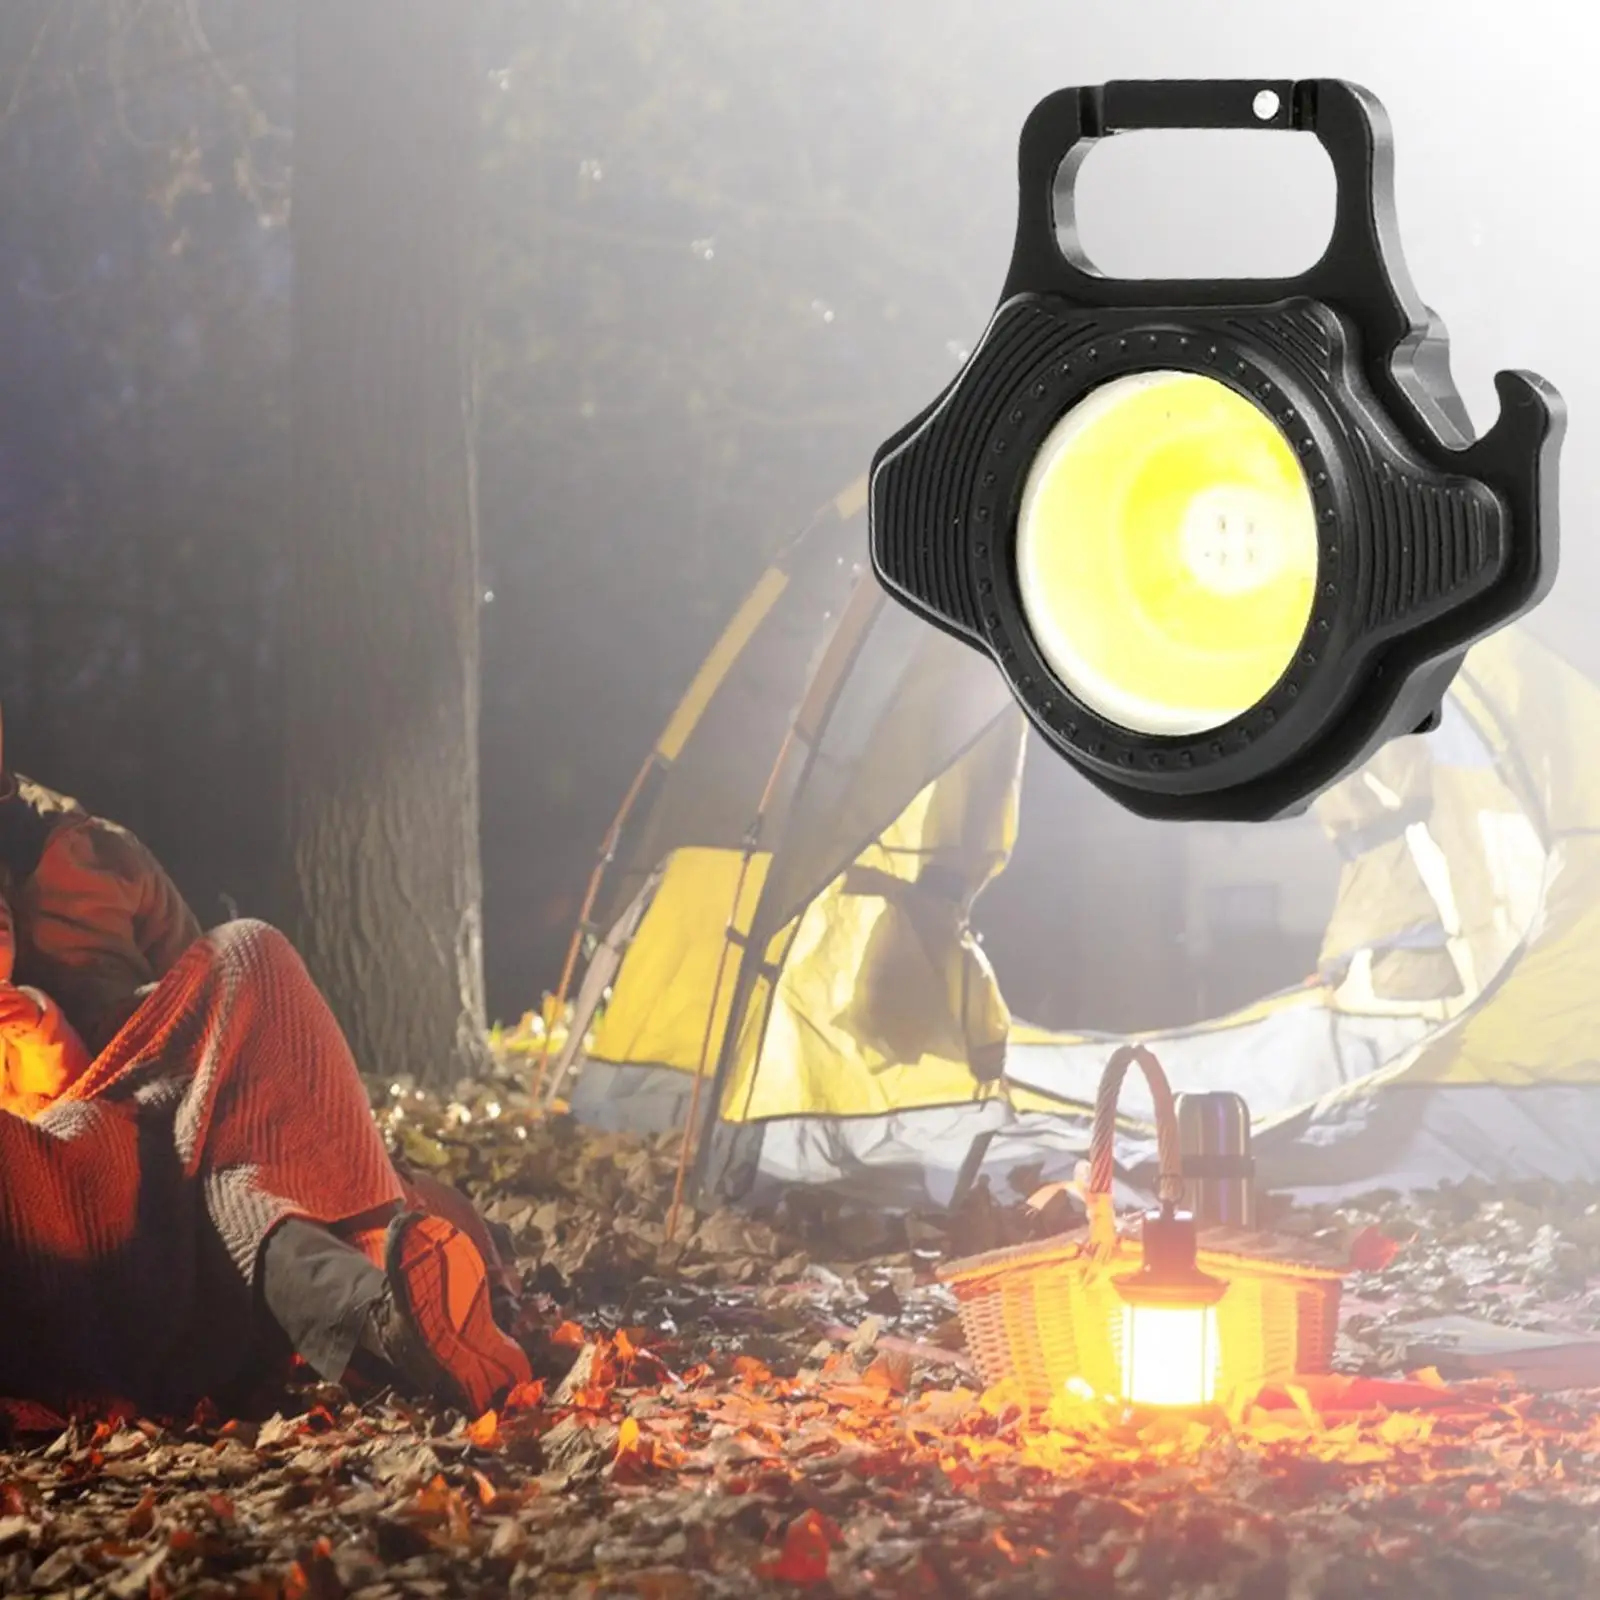 Small LED Flashlight Collapsible Lightweight Bright Bottle Opener with Magnet Base Keychain Torch for Walking Daily Use Working